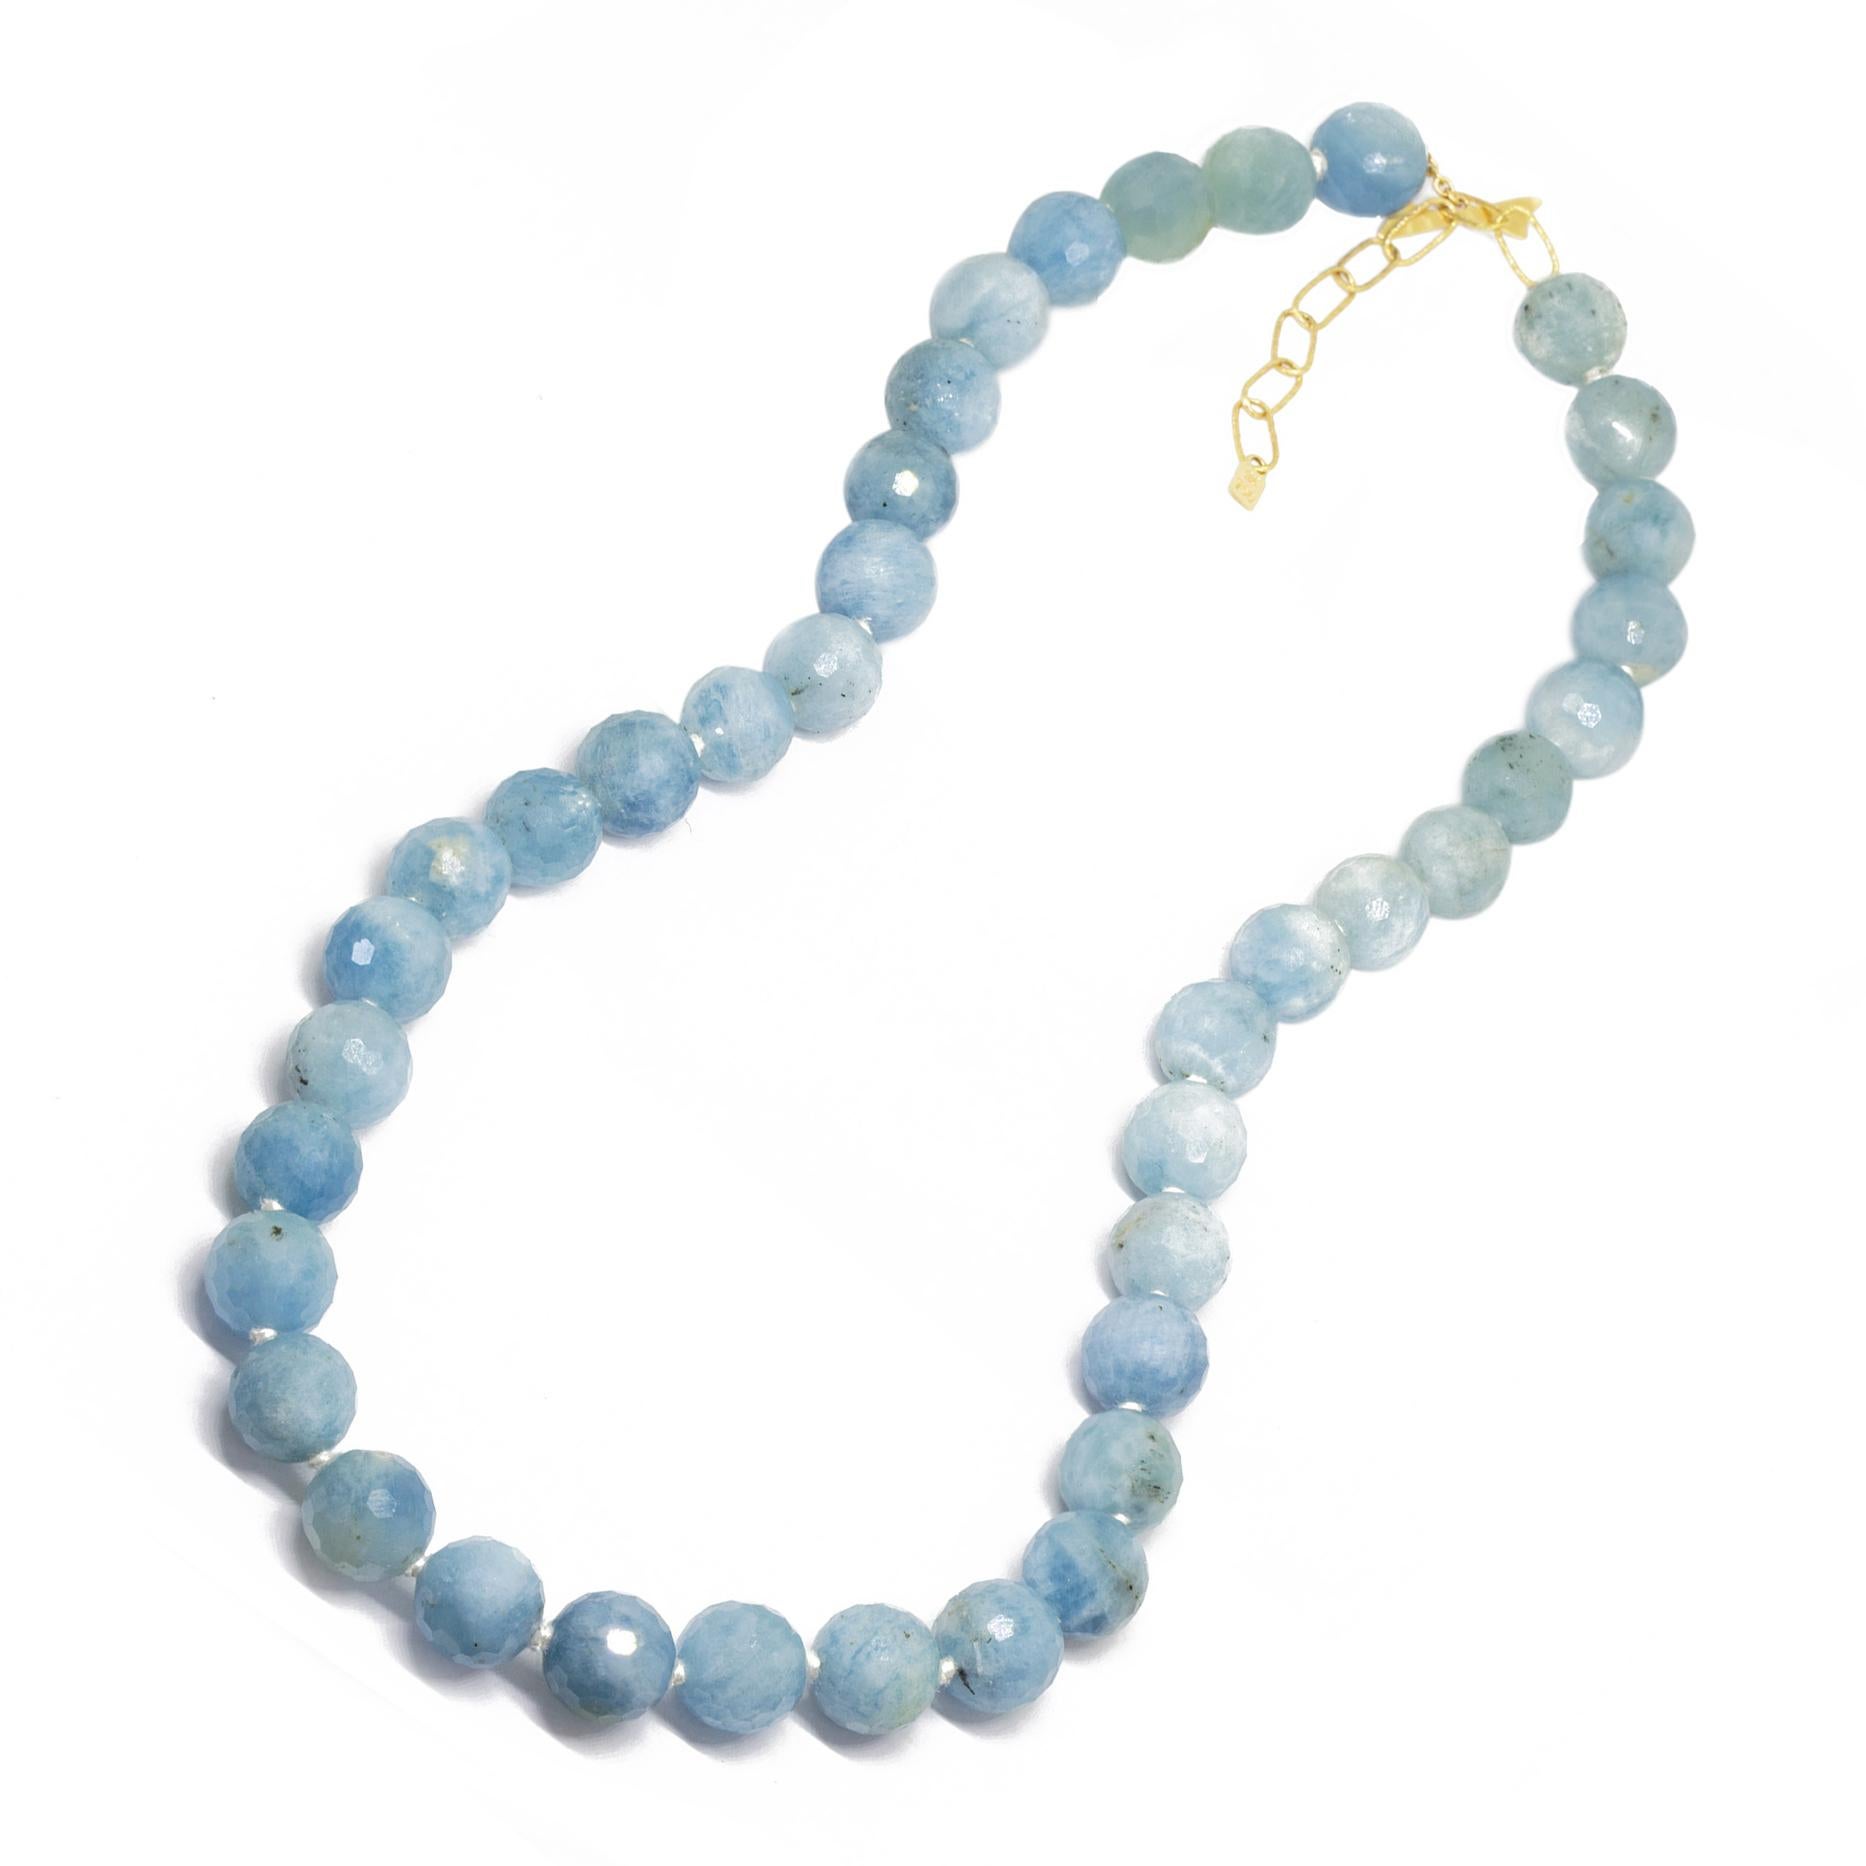 Beaded necklaces are back and we've never been happier! The Lotus Aquamarine Gold Necklace is one of many beautiful, handmade, beaded necklaces within our collection. Wear it on its own, layer it with a few more Lotus Necklaces, or throw in a